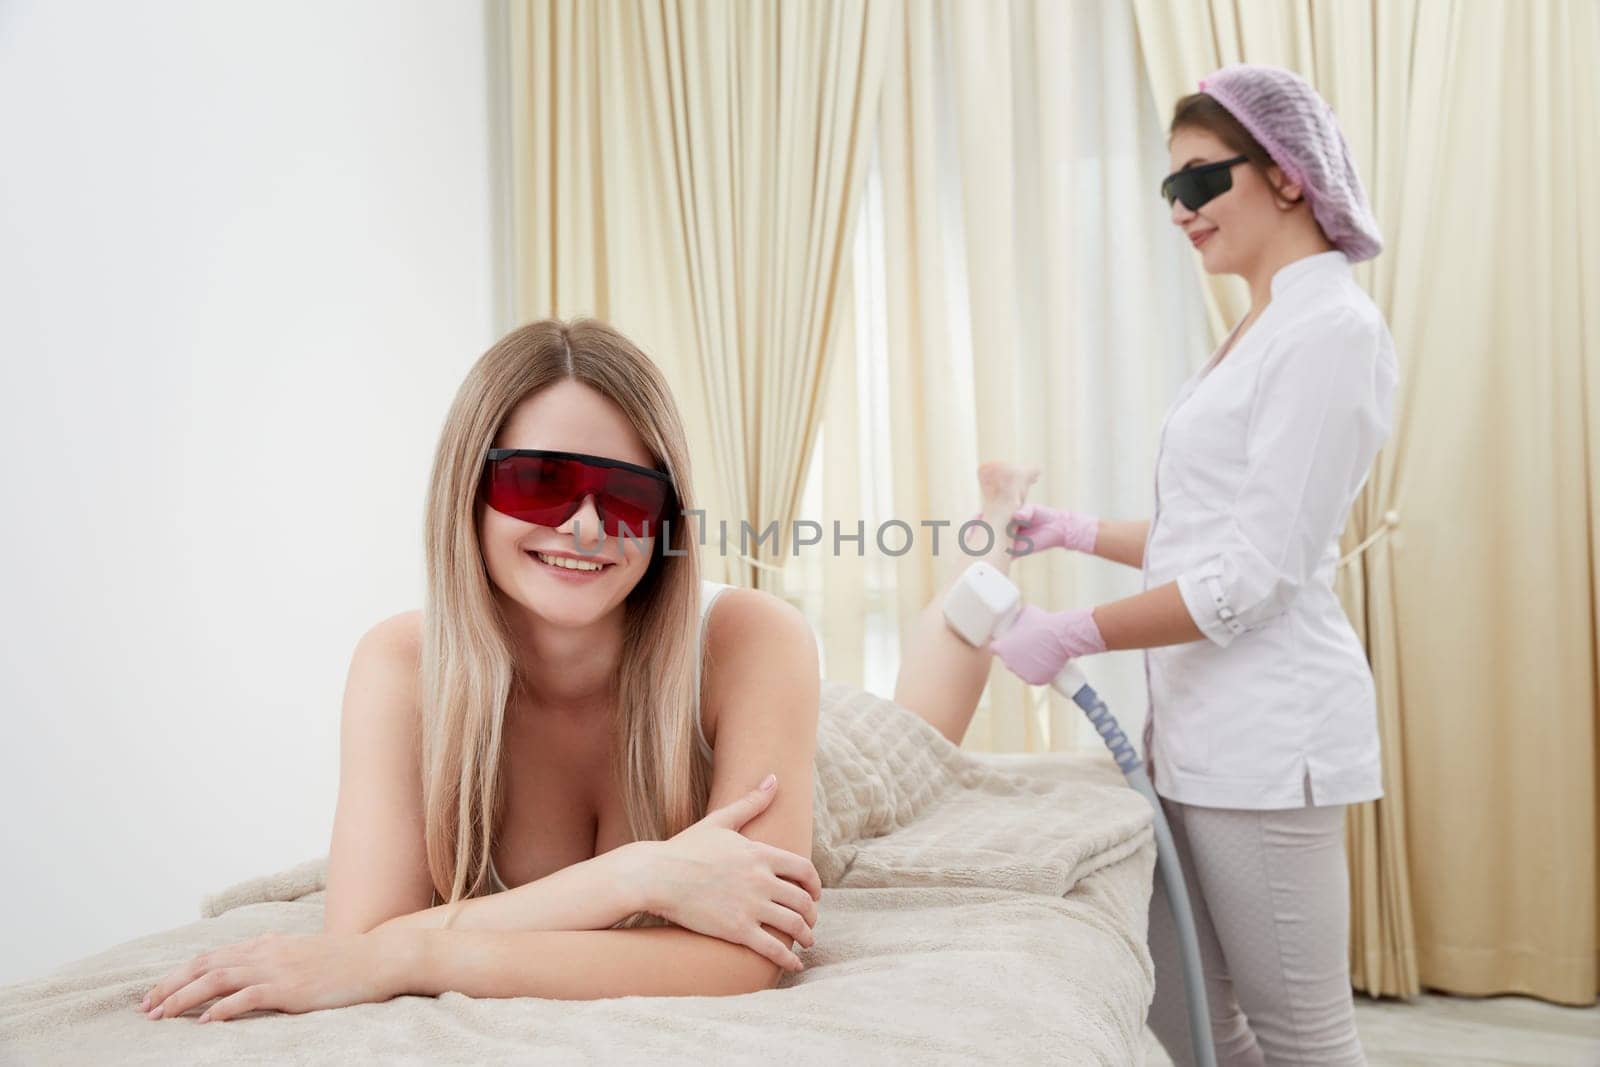 Woman at the salon lies down for a laser hair removal procedure on her legs